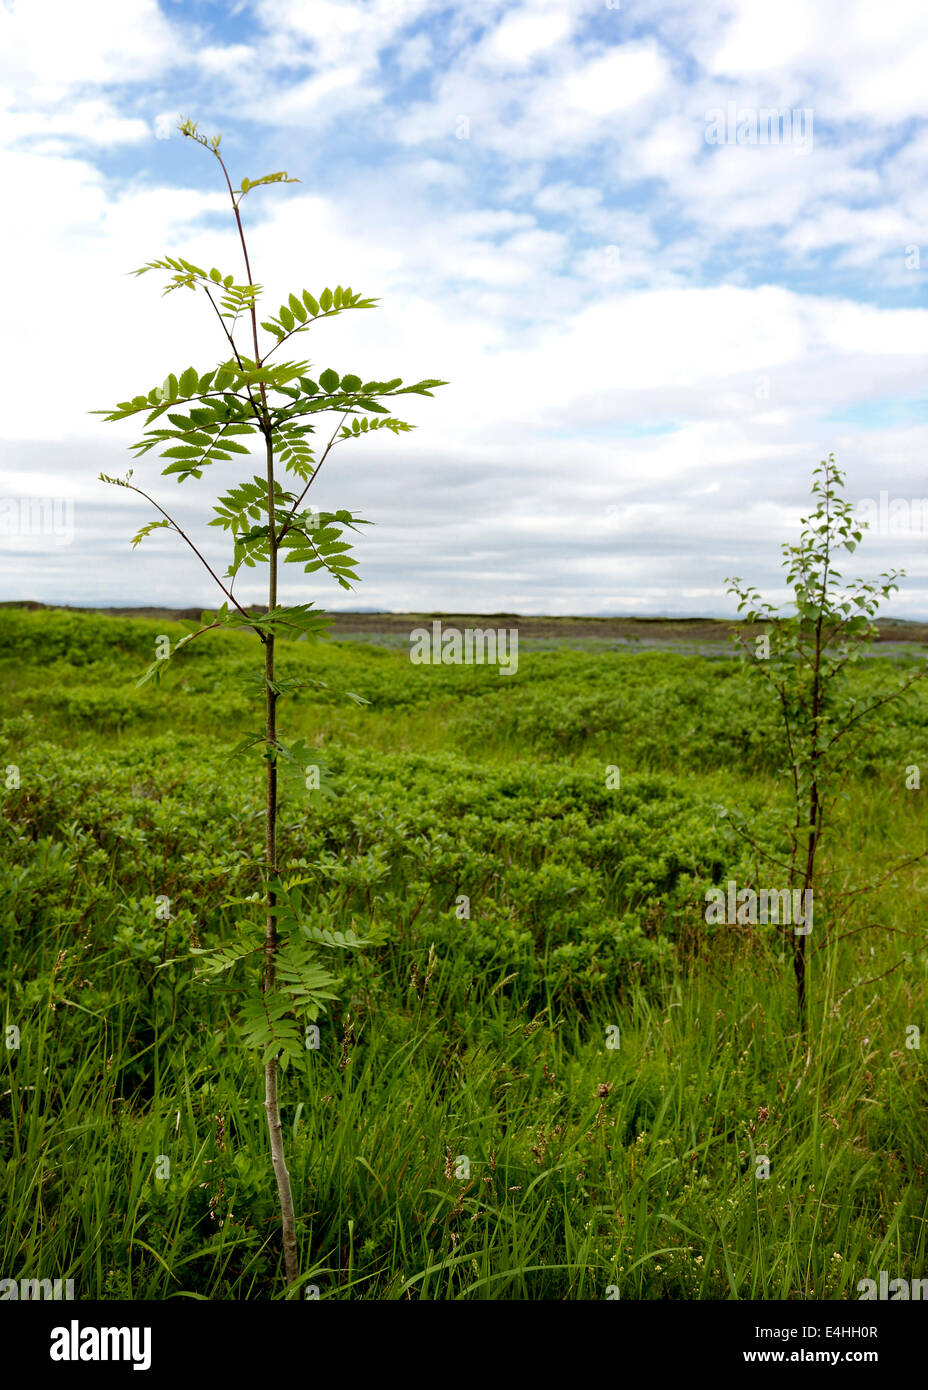 Young Mountain Ash Tree & Birch Tree in the background outdoor in a field, south part of Iceland. Stock Photo